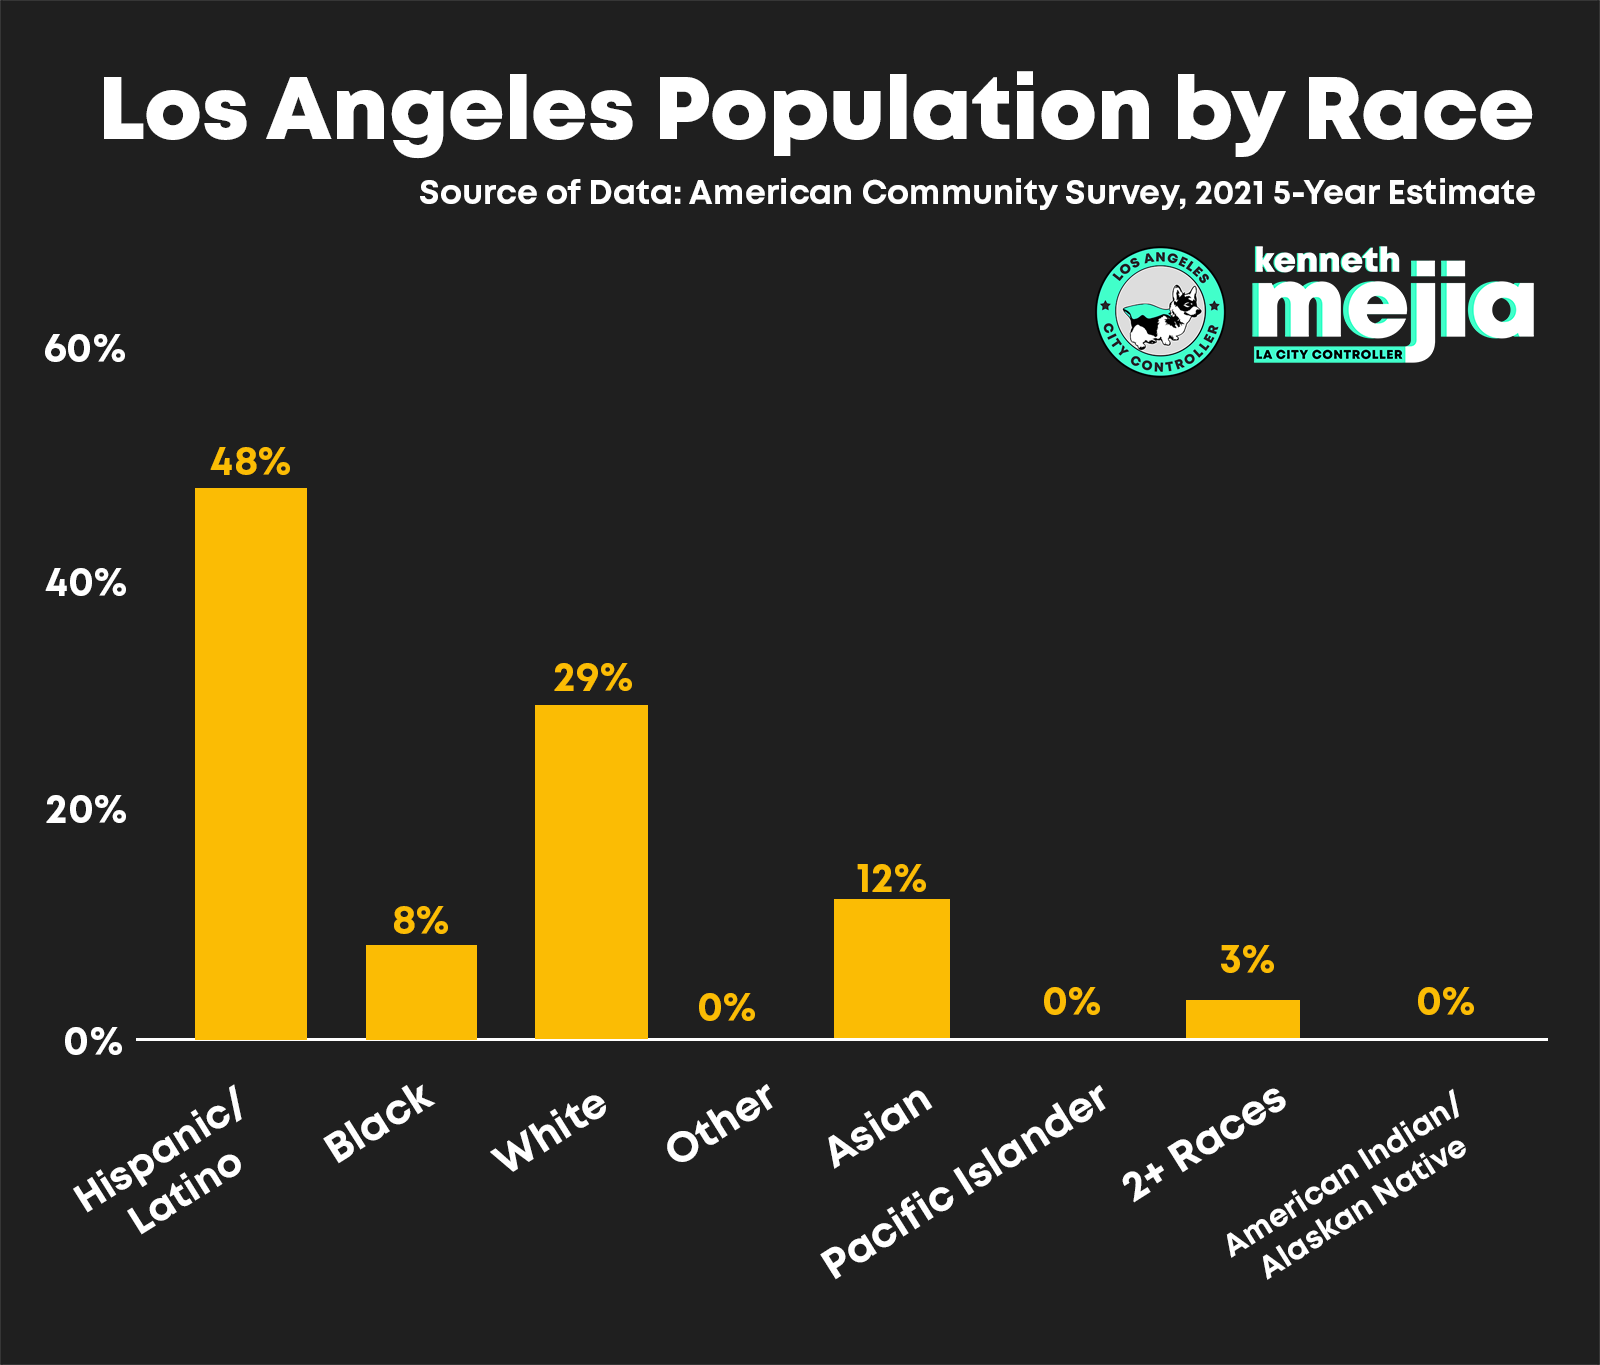 A bar chart of Los Angeles Population by Race. Hispanic/Latino is 48%. Black is 8%. White is 29%. Other is 0%. Asian is 12%, Pacific Islander is 0%, 2+ races is 3%, and American Indian/Alaskan Native is 0%. Source of Data is American Community Survey, 2021 5-Year Estimate.